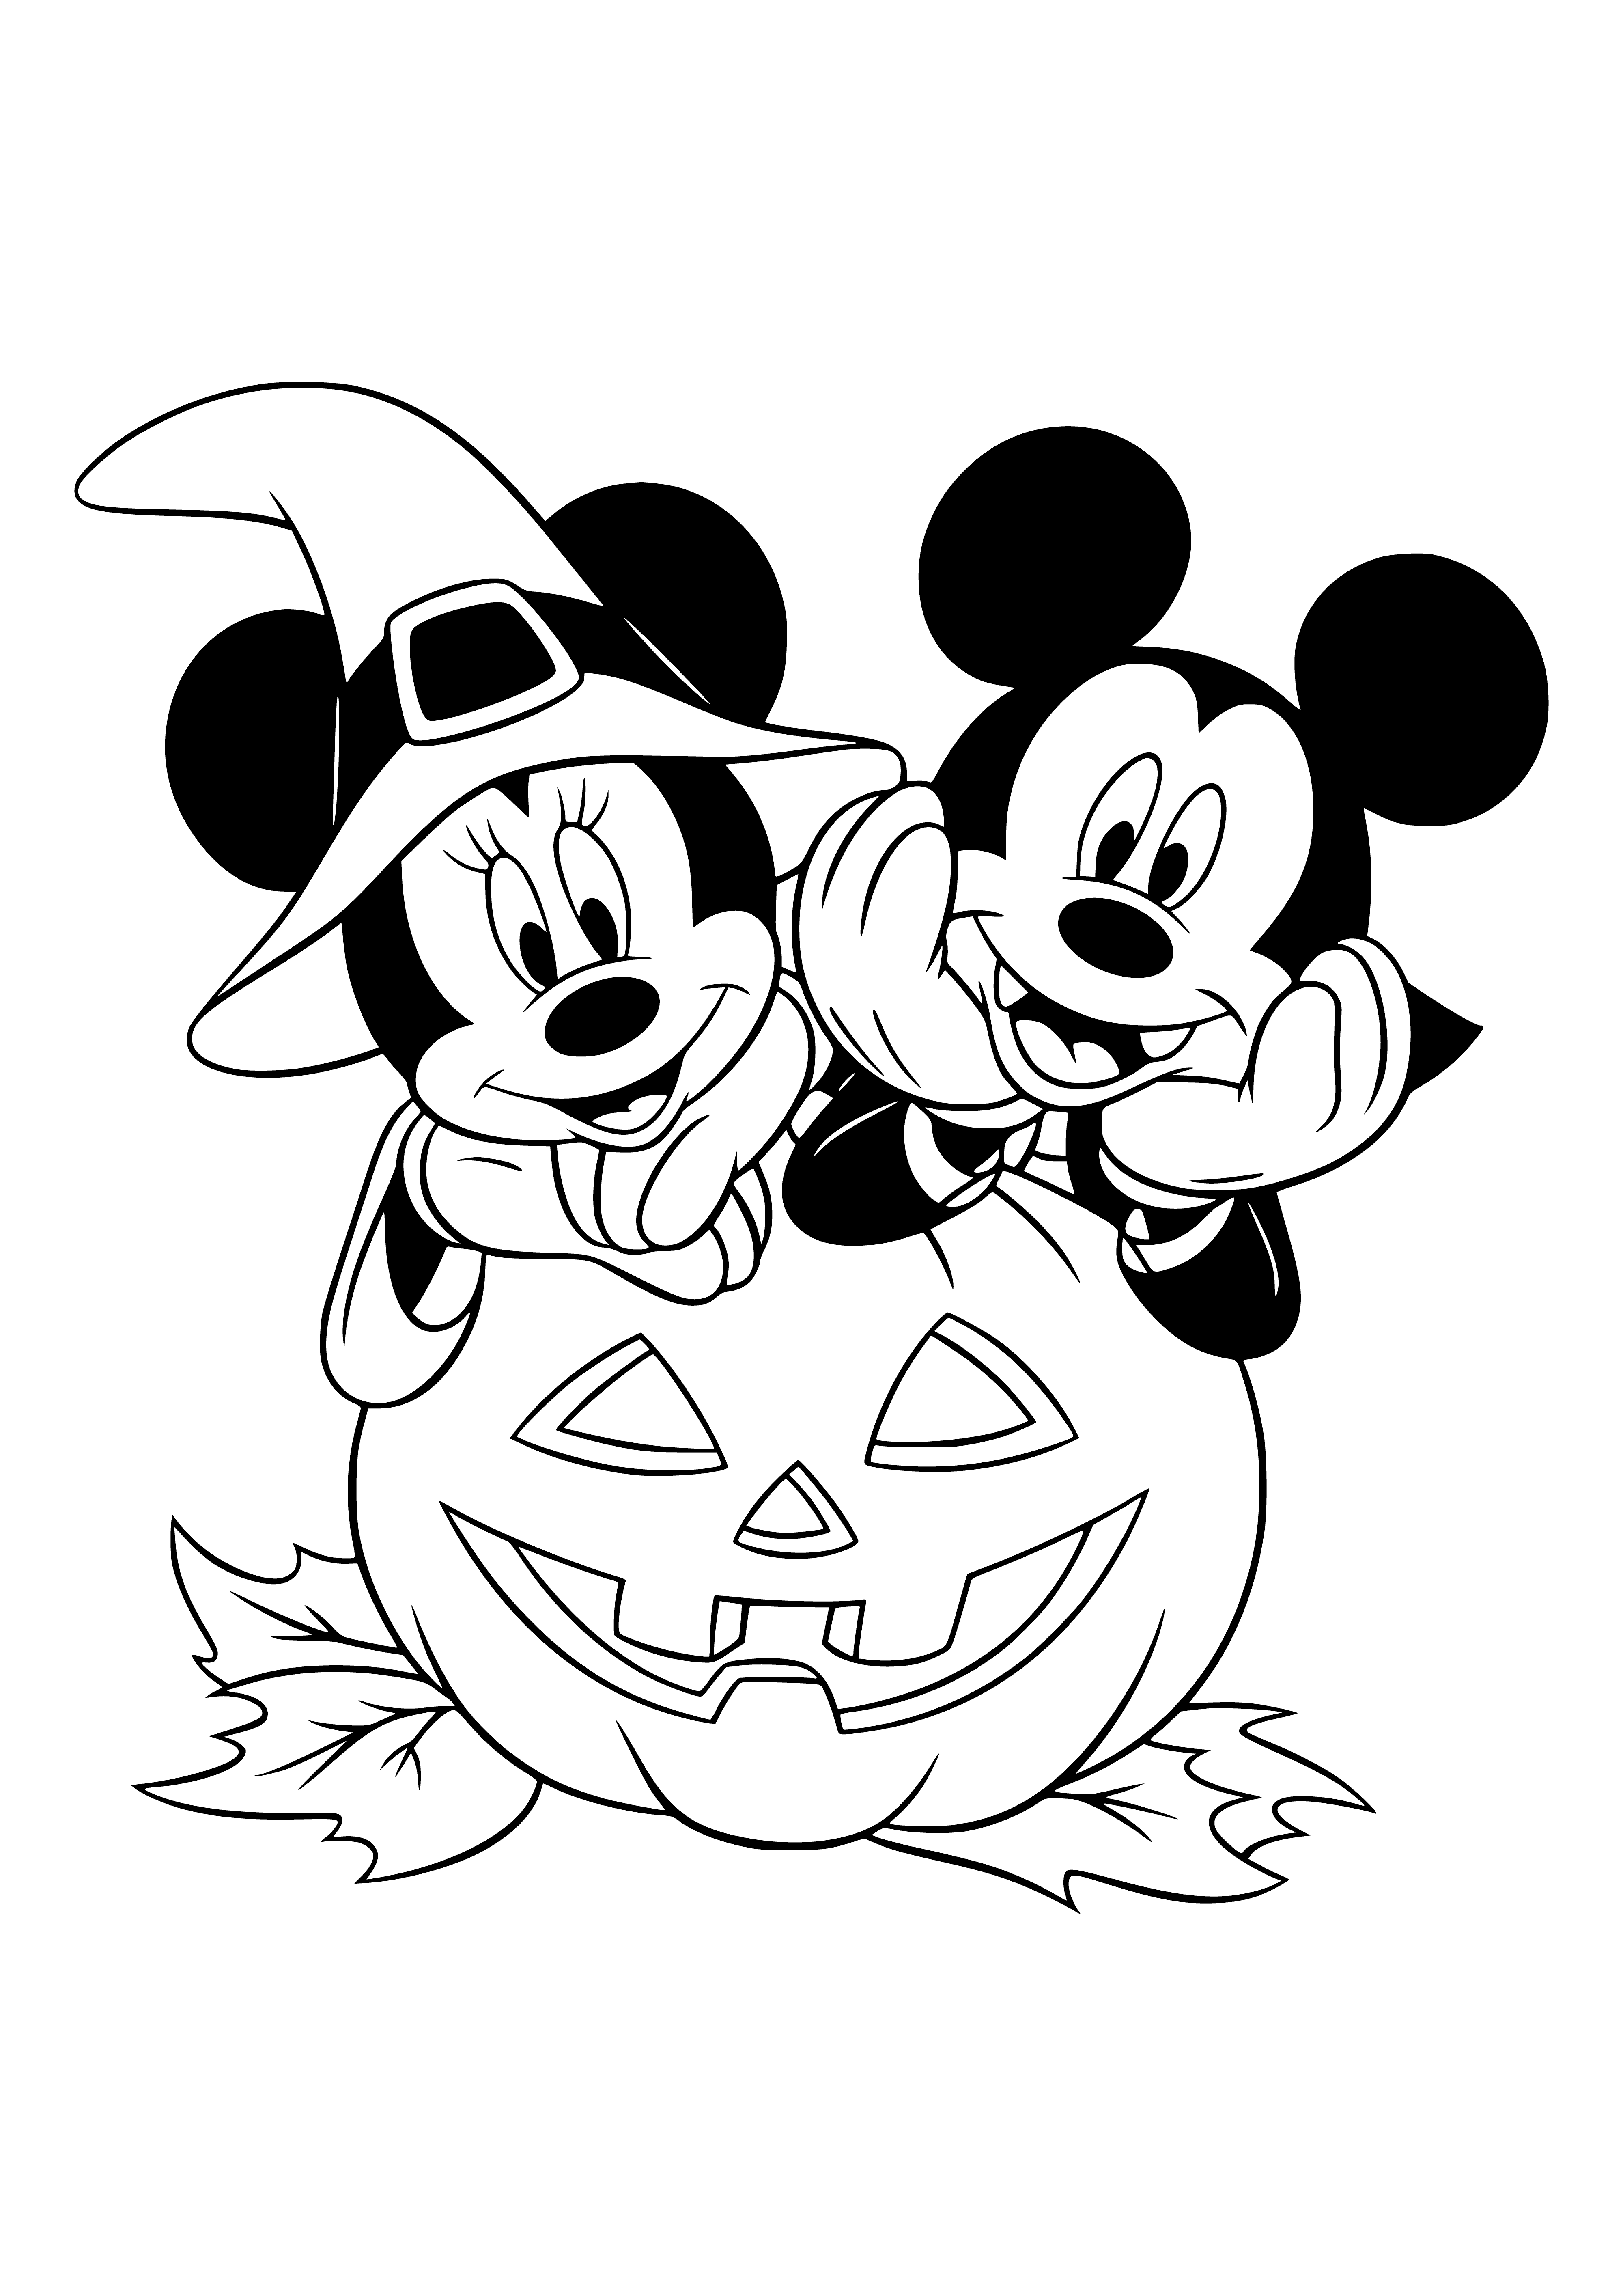 Minnie and Mickey Mouse on Halloween coloring page